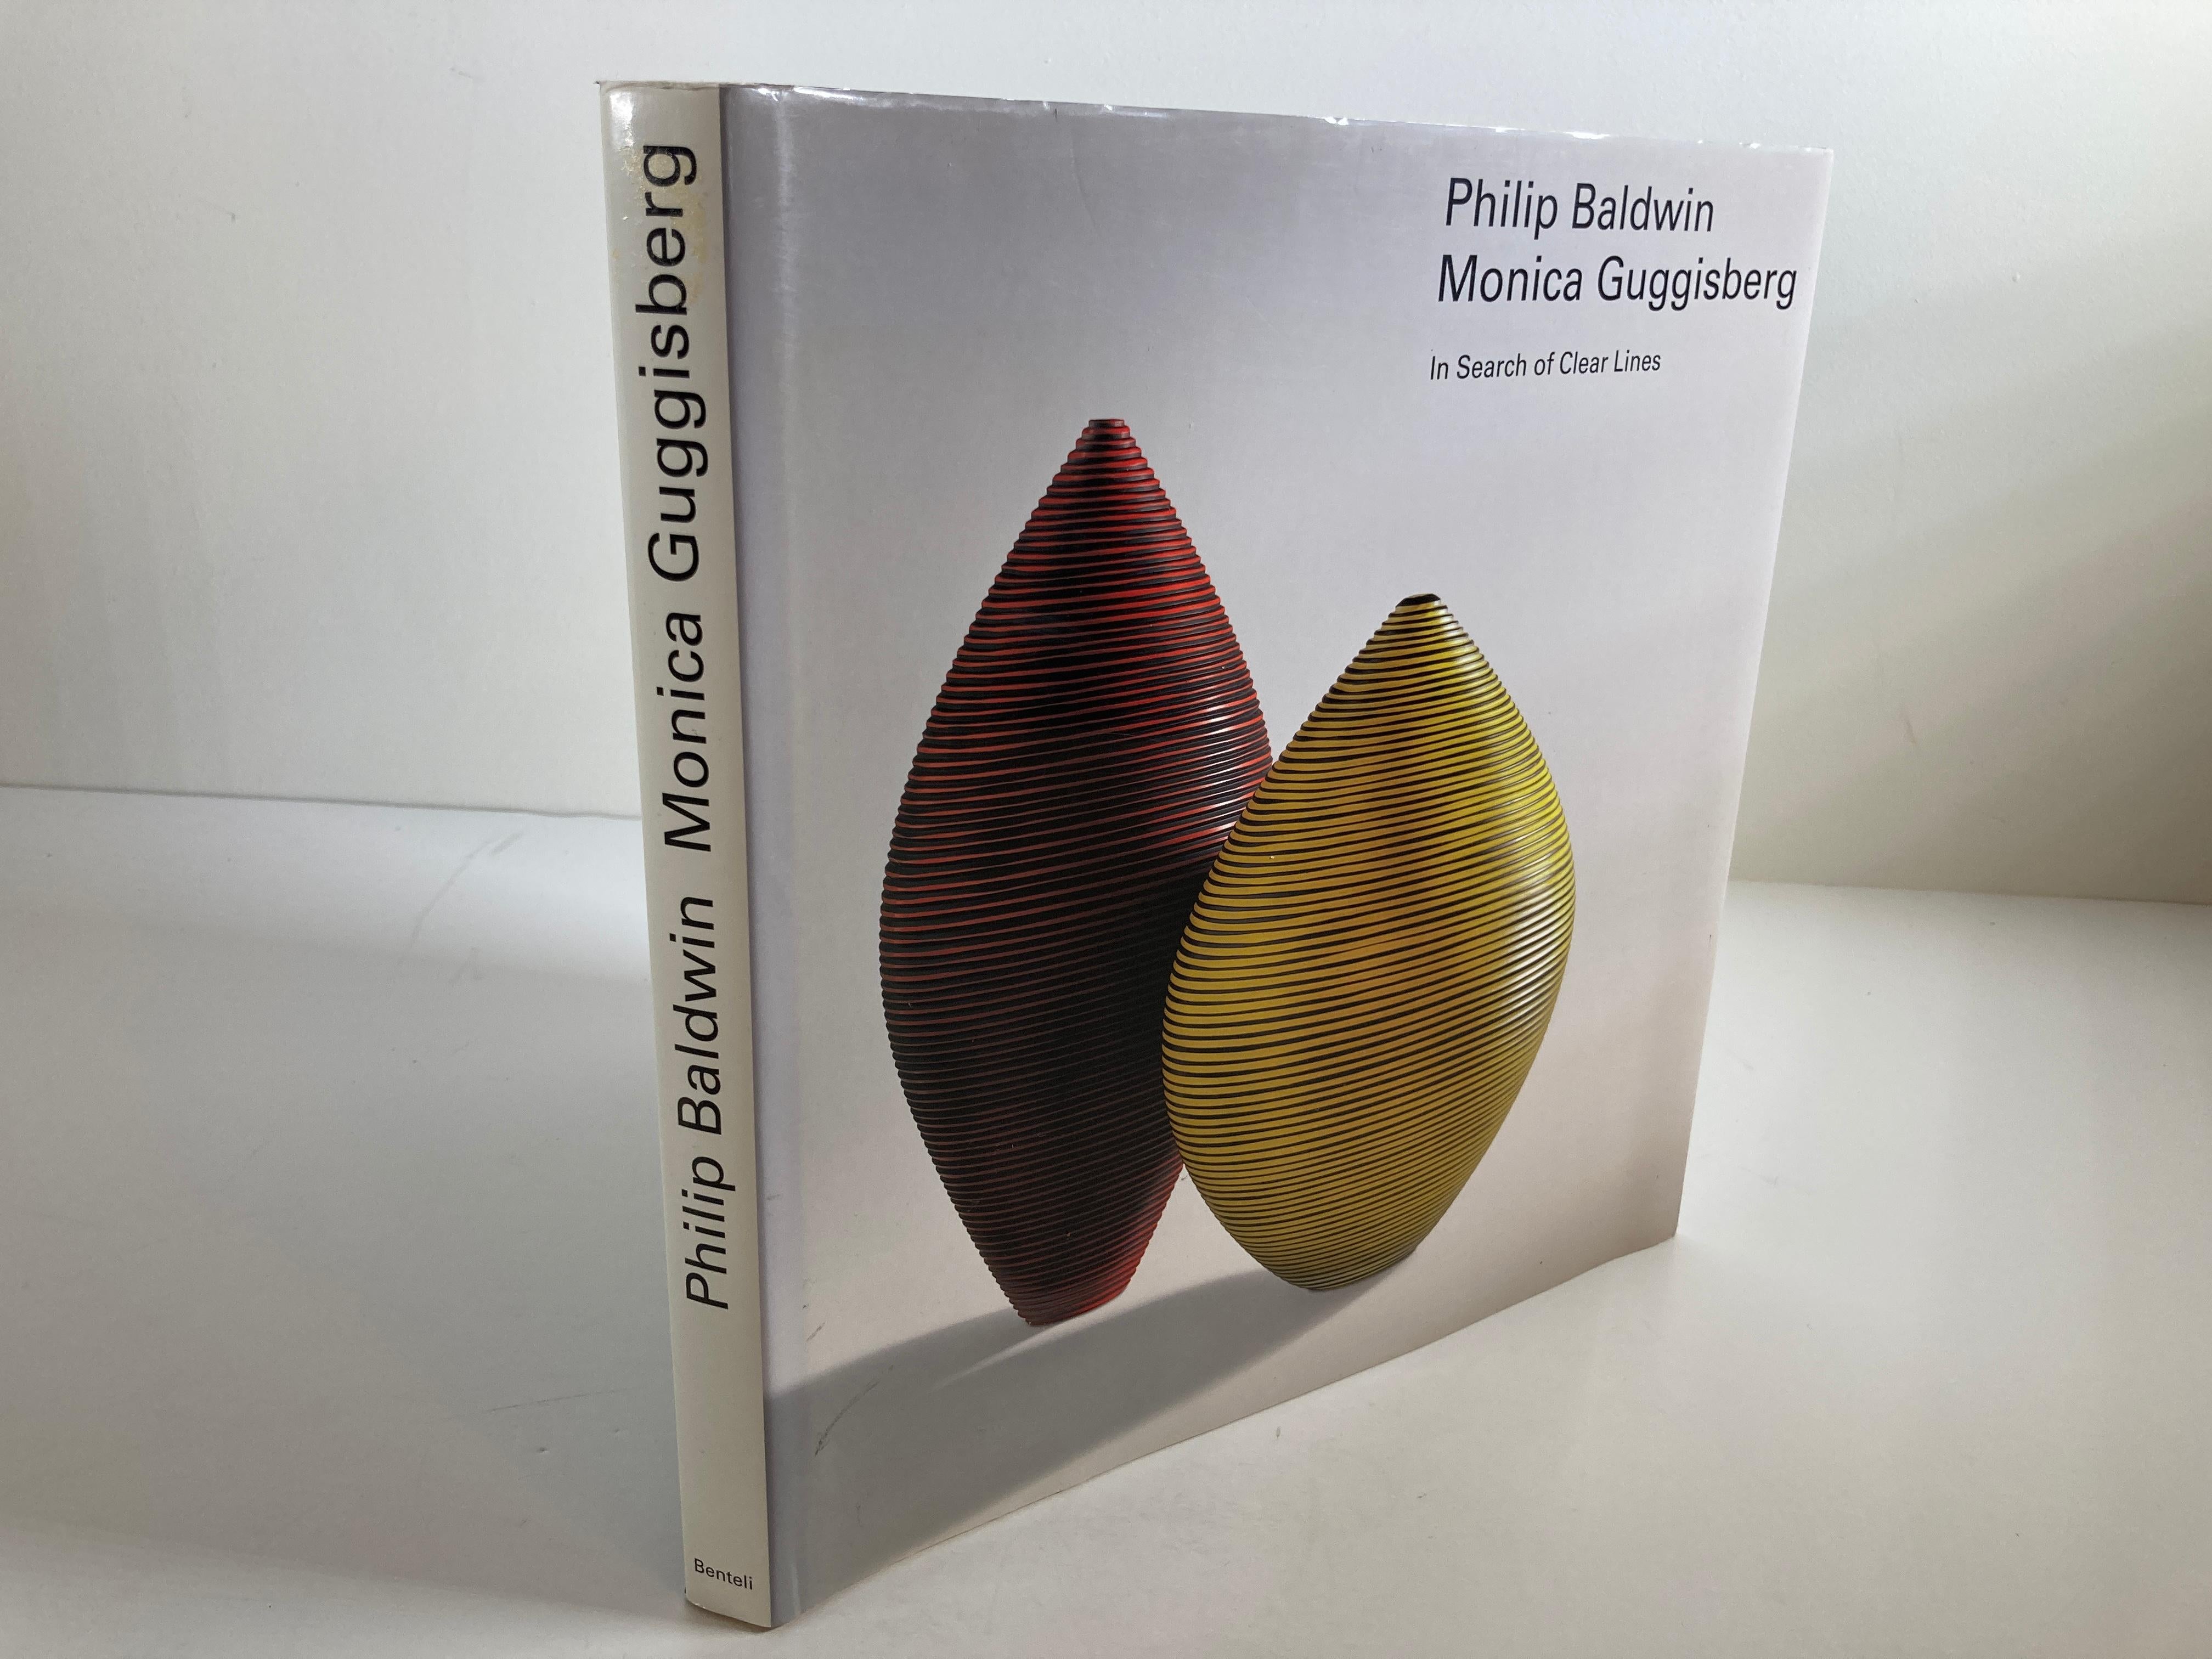 Philip Baldwin, Monica Guggisberg: In Search Of Clear Lines
By Baldwin, Philip And Monica Guggisberg.
With texts by Susanne K. Frantz and Jean Luc Olivié
Published by Editions Benteli, Berne, 1998
Decorative Arts; Art glass oversizes coffee